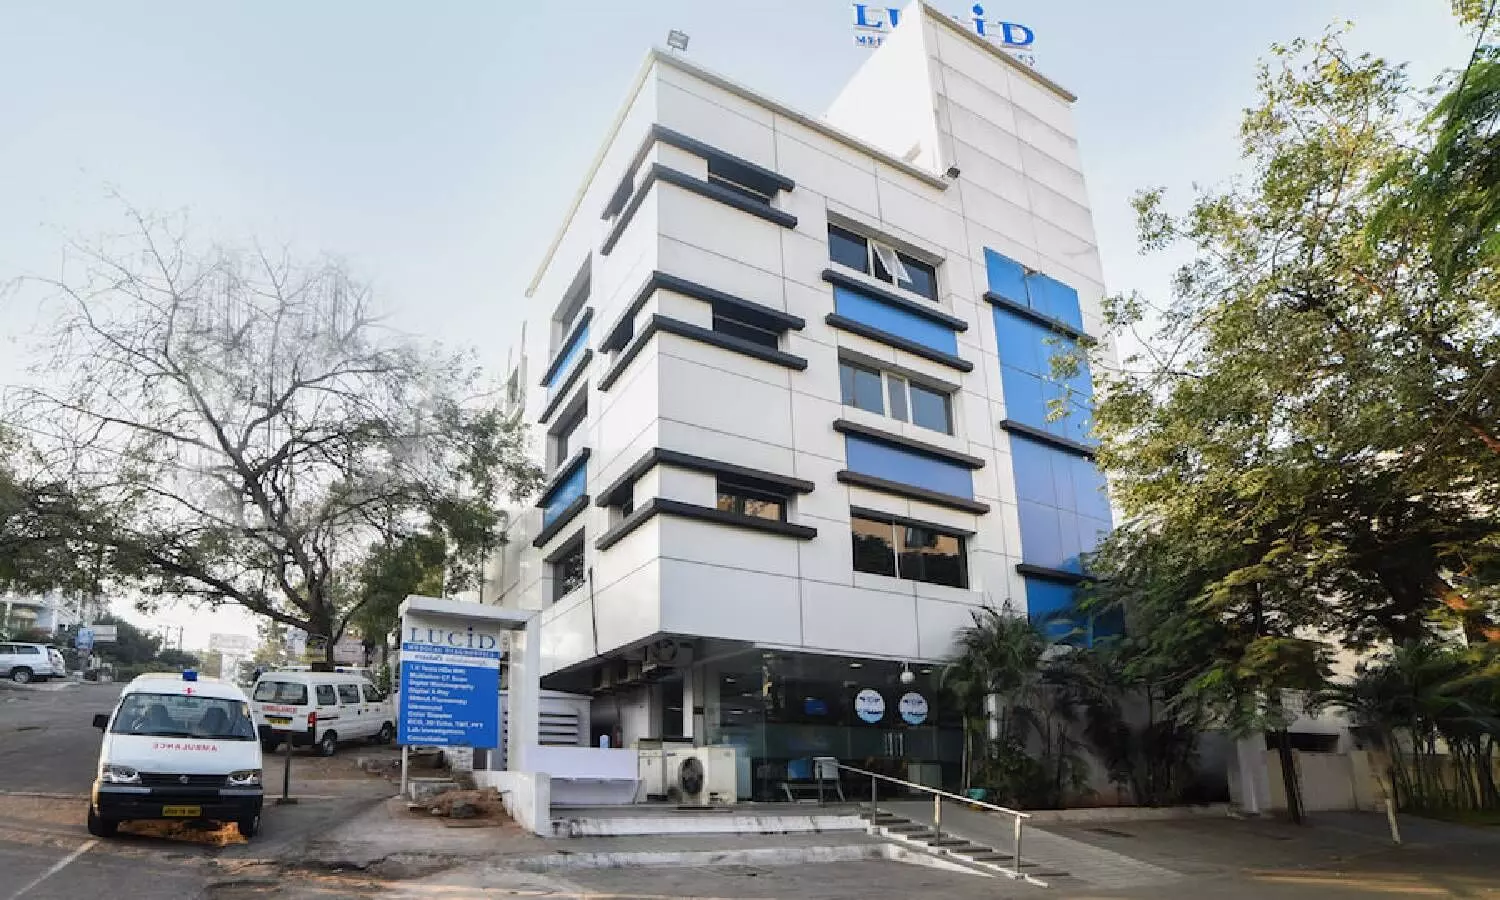 Lucid Medical Diagnostic in Banjara Hills directed to pay Rs. 25,000 to patient who received wrong reports